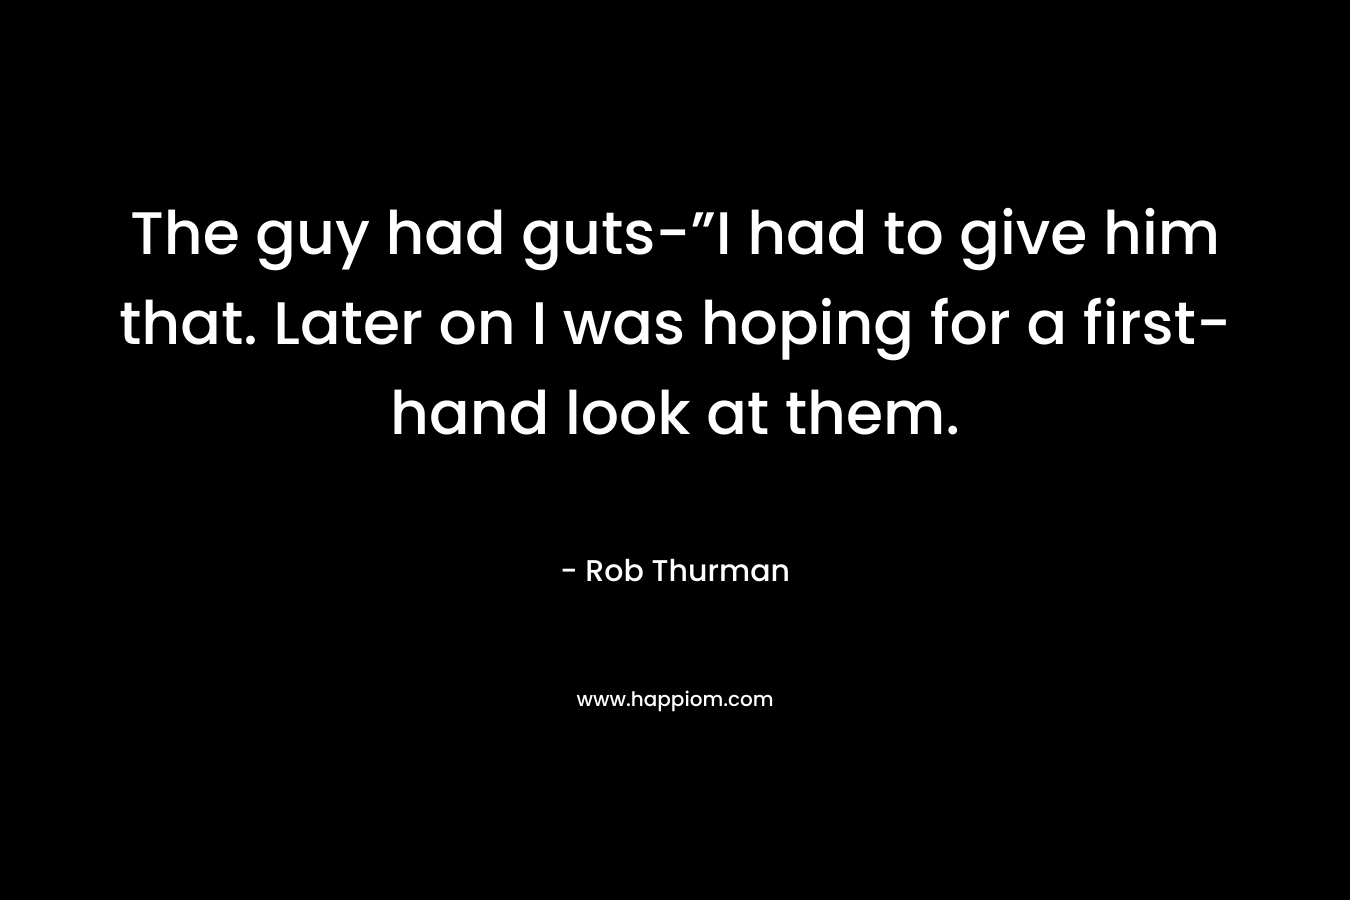 The guy had guts-”I had to give him that. Later on I was hoping for a first-hand look at them. – Rob Thurman